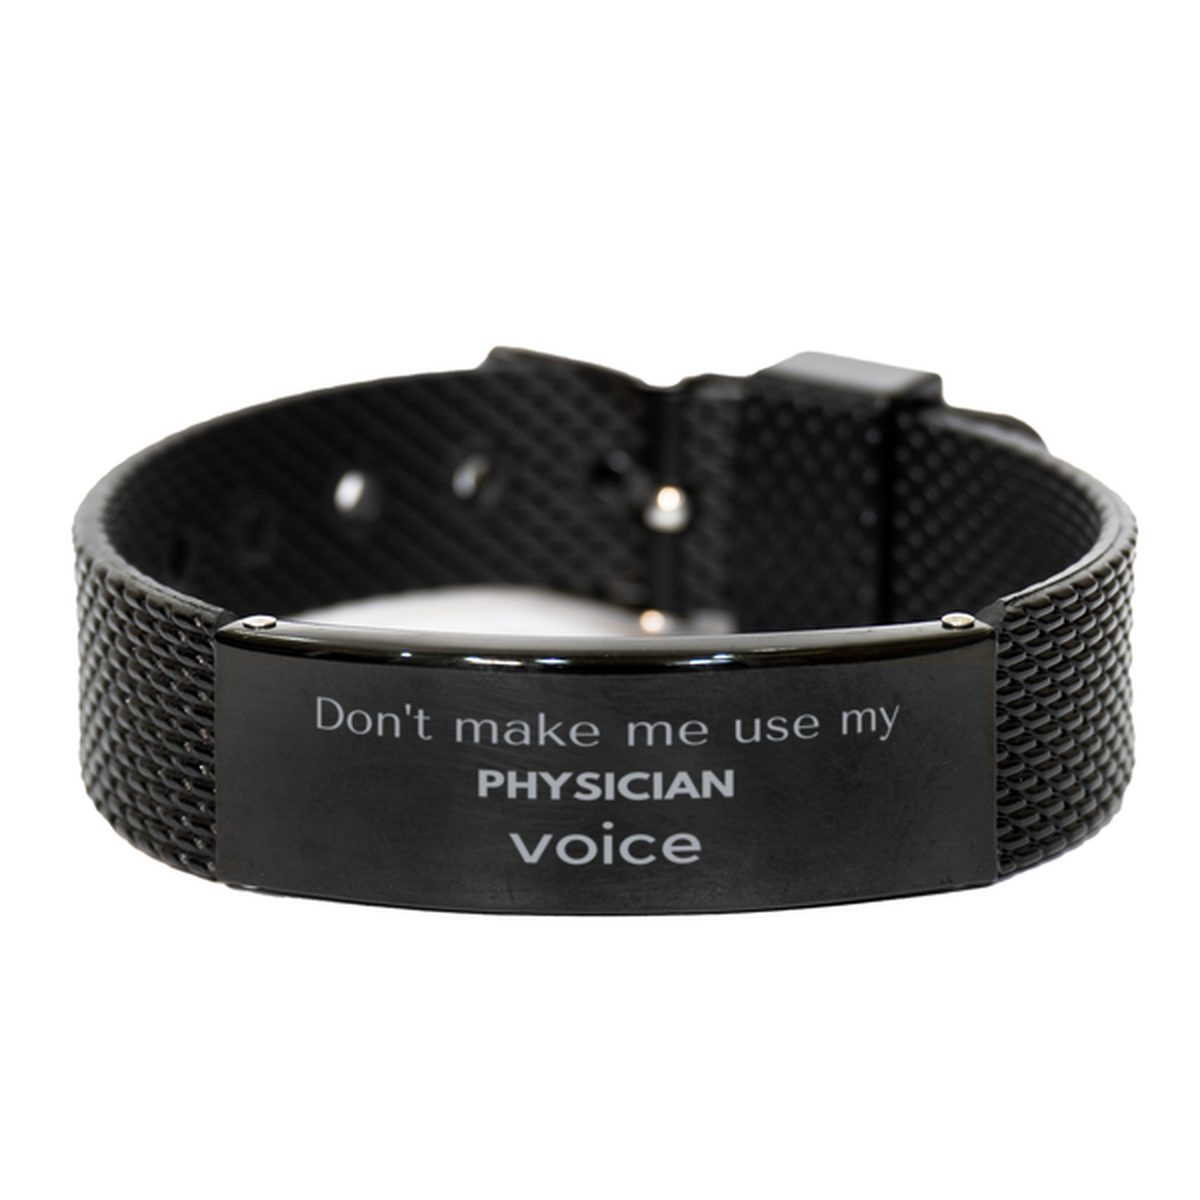 Don't make me use my Physician voice, Sarcasm Physician Gifts, Christmas Physician Black Shark Mesh Bracelet Birthday Unique Gifts For Physician Coworkers, Men, Women, Colleague, Friends